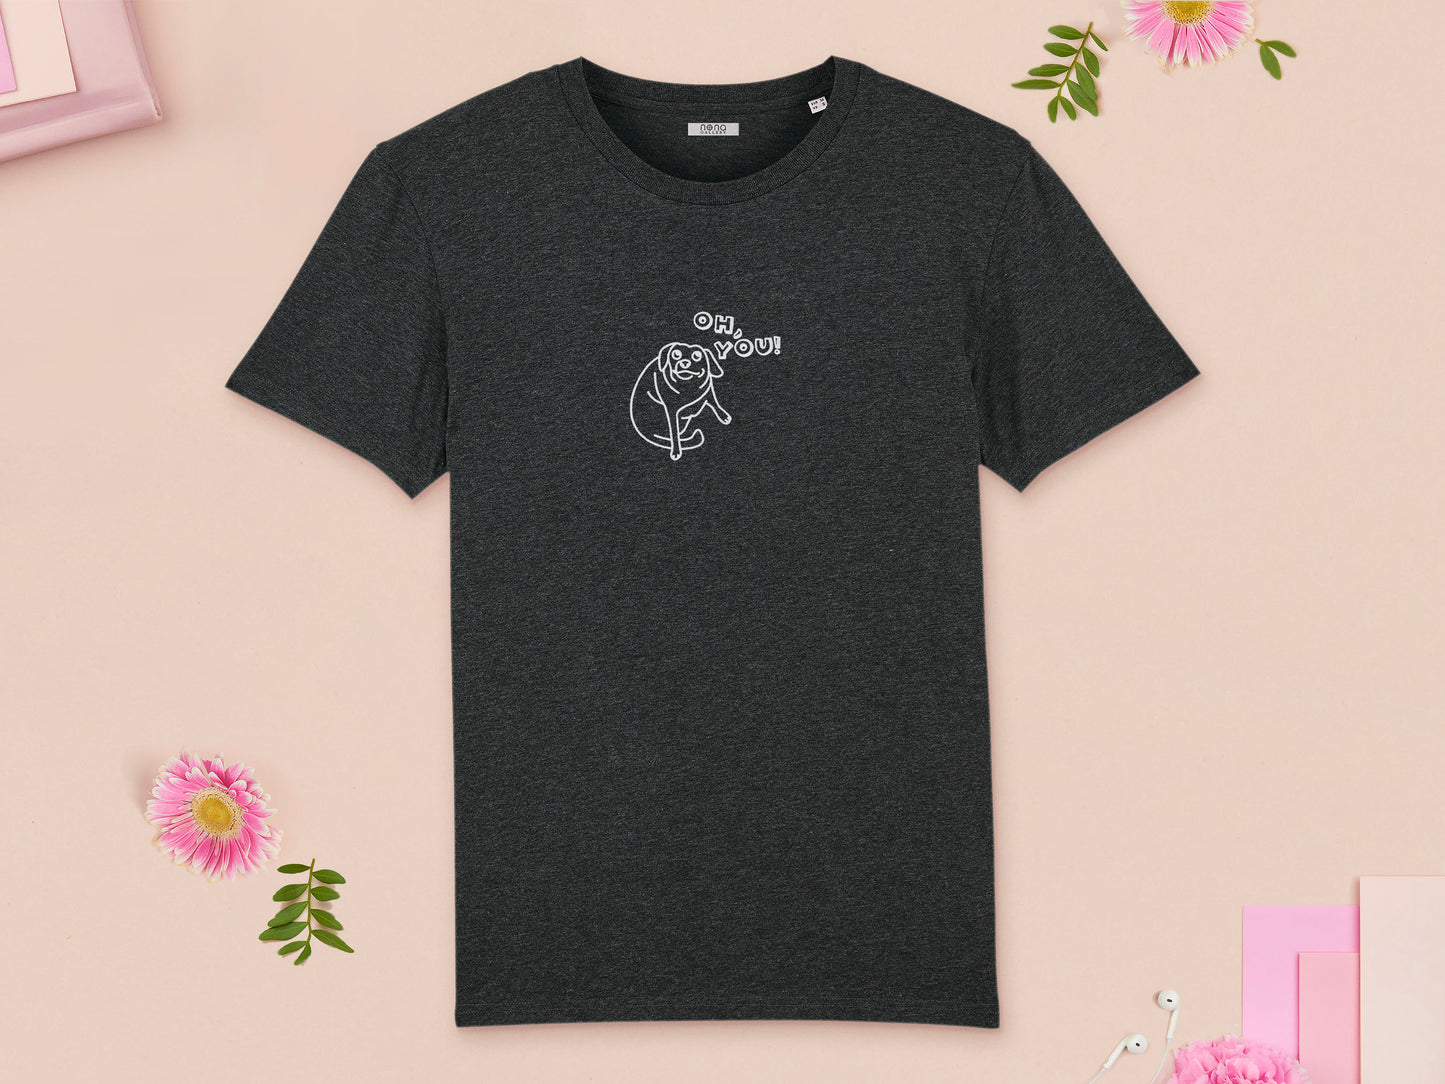 A grey crew neck short sleeve t-shirt, with an embroidered white thread design of cute meme dog with cheeky expression and big eyes, with the text Oh You!